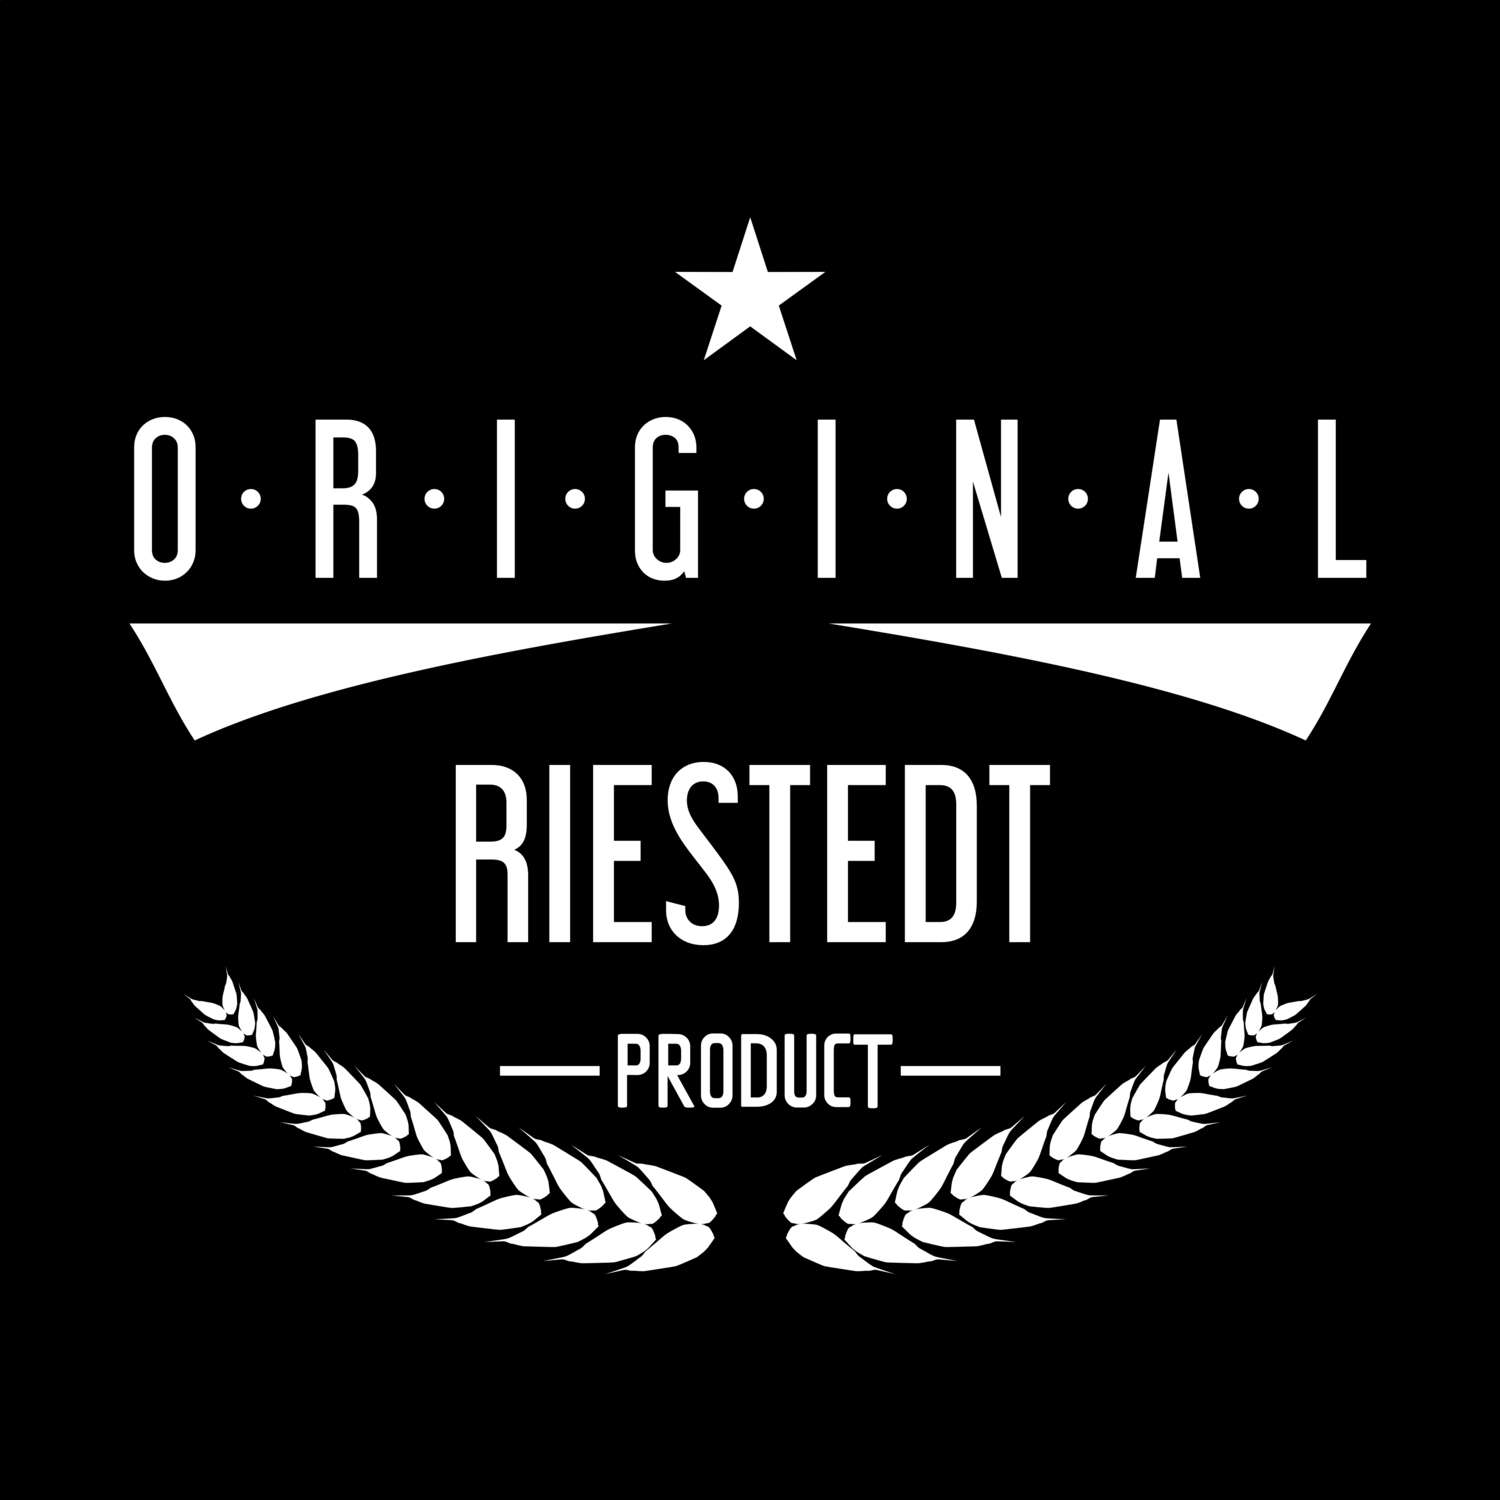 Riestedt T-Shirt »Original Product«